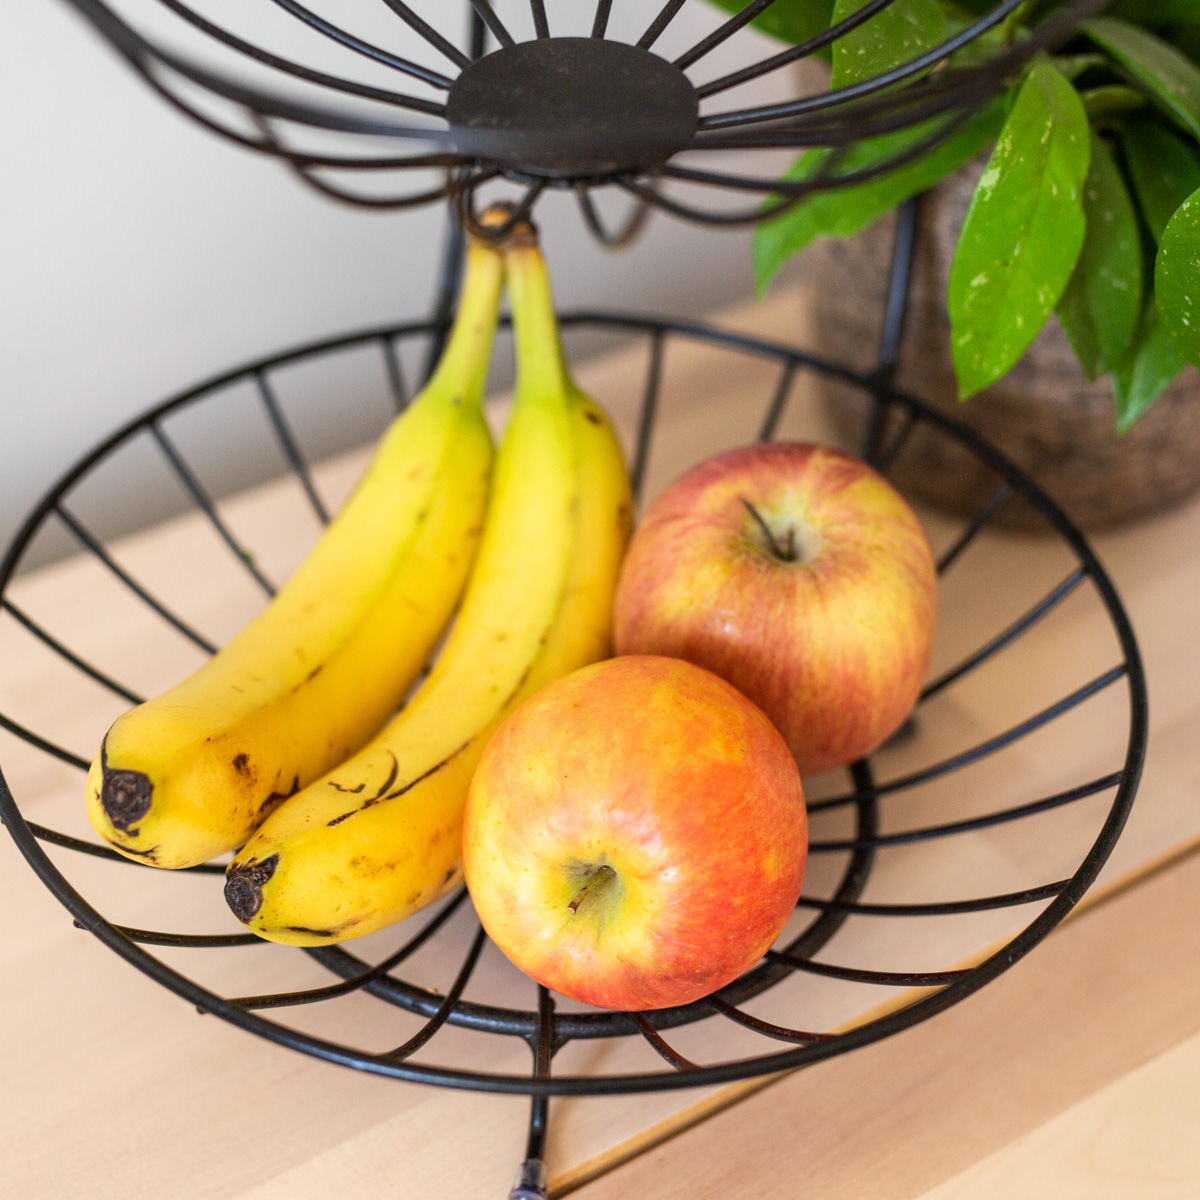 apples and bananas in fruit basket